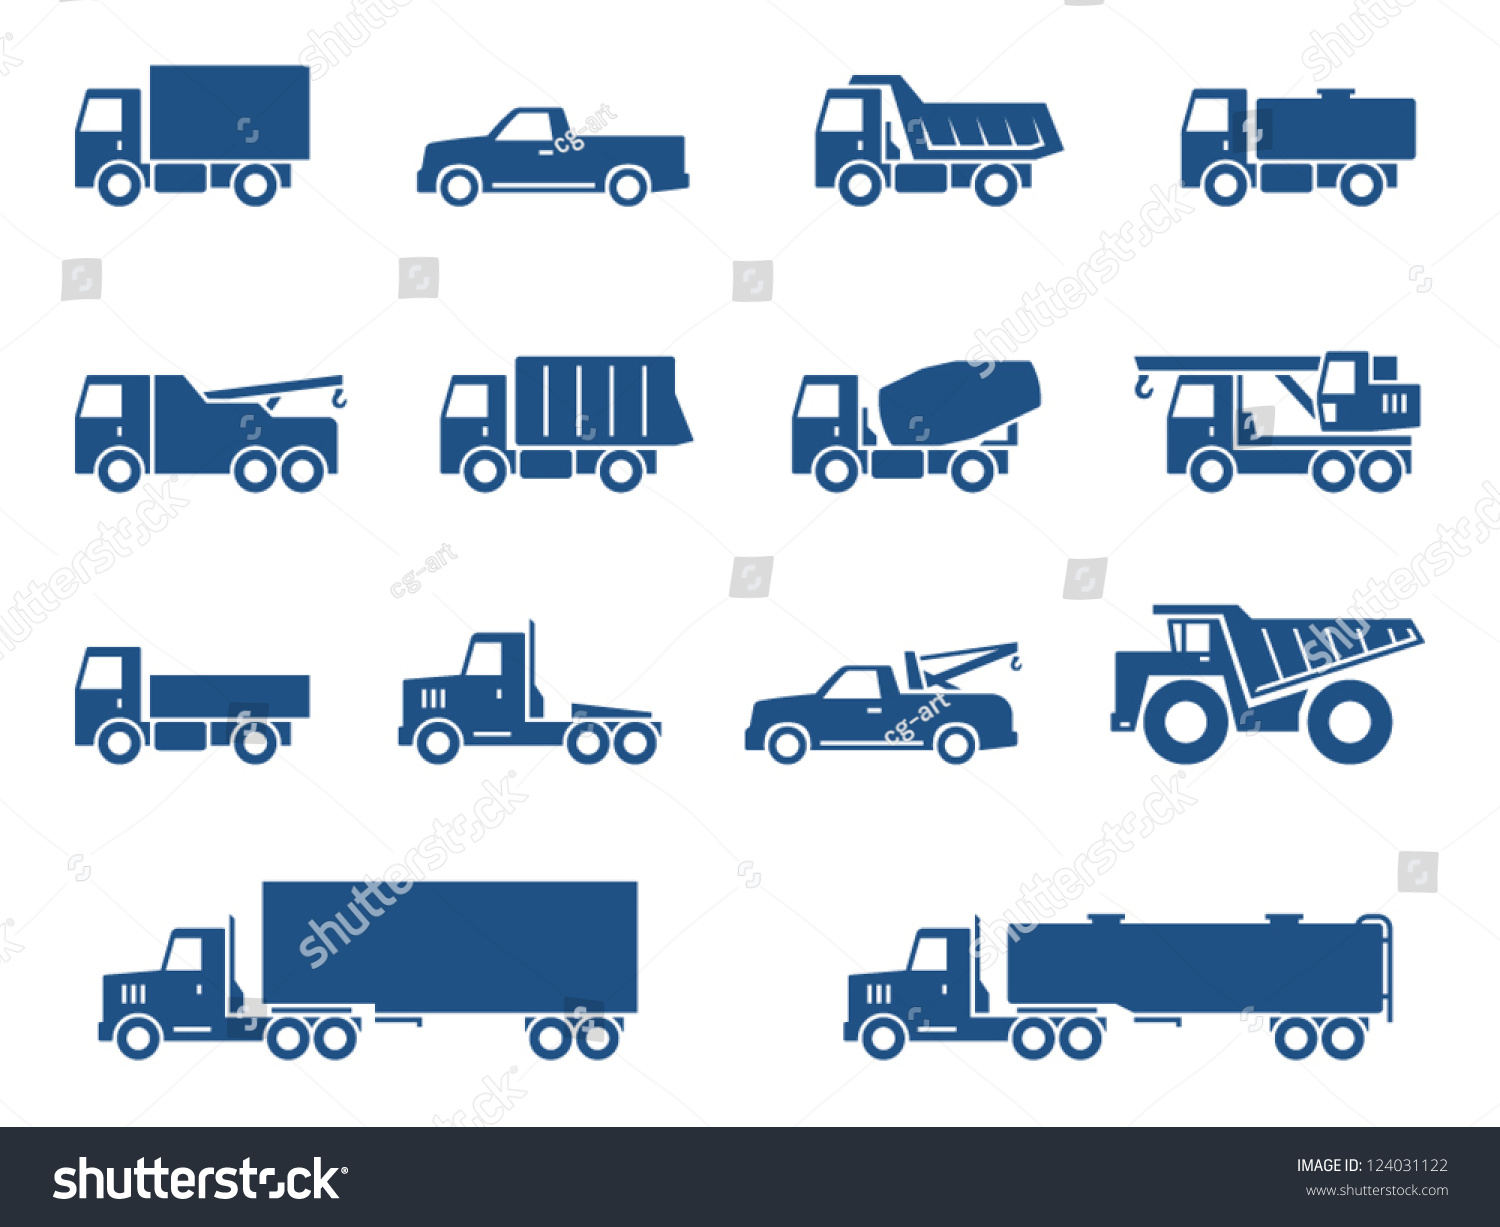 SVG of Trucks icons set. Vector silhouettes of vehicles svg